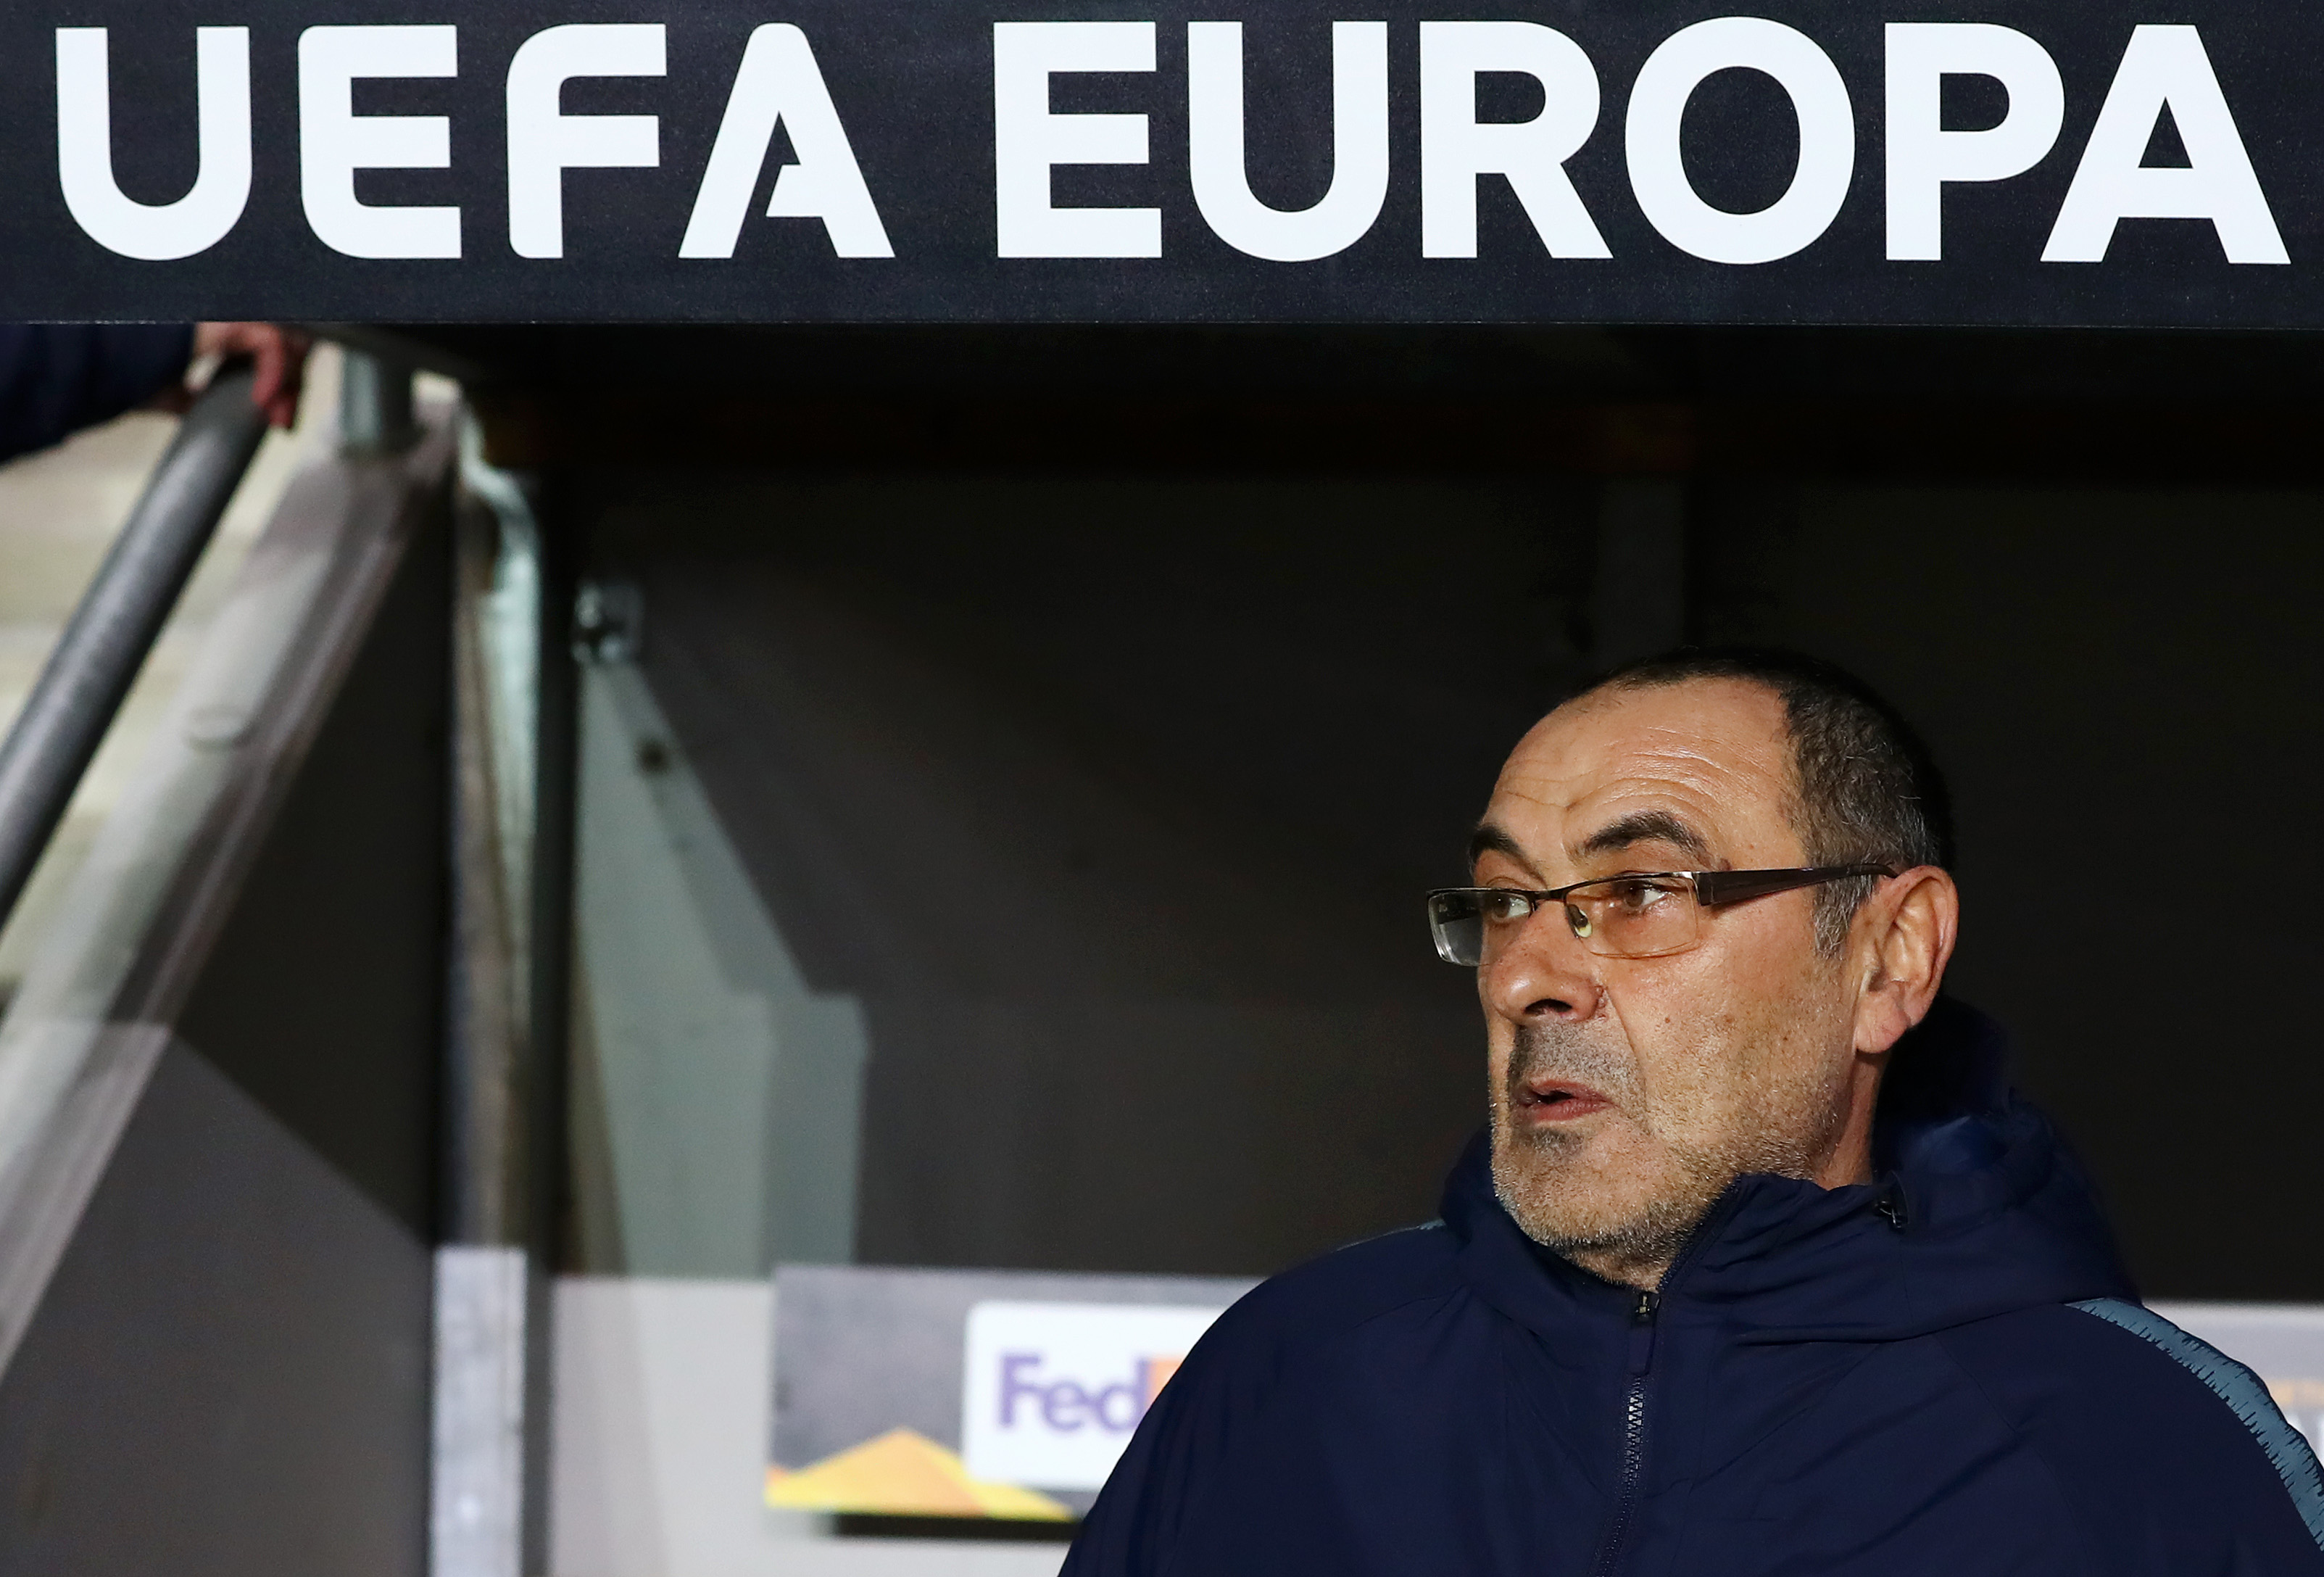 PRAGUE, CZECH REPUBLIC - APRIL 11:  Maurizio Sarri, Manager of Chelsea looks on during the UEFA Europa League Quarter Final First Leg match between Slavia Prague and Chelsea at Eden Stadium on April 11, 2019 in Prague, Czech Republic. (Photo by Martin Rose/Bongarts/Getty Images)